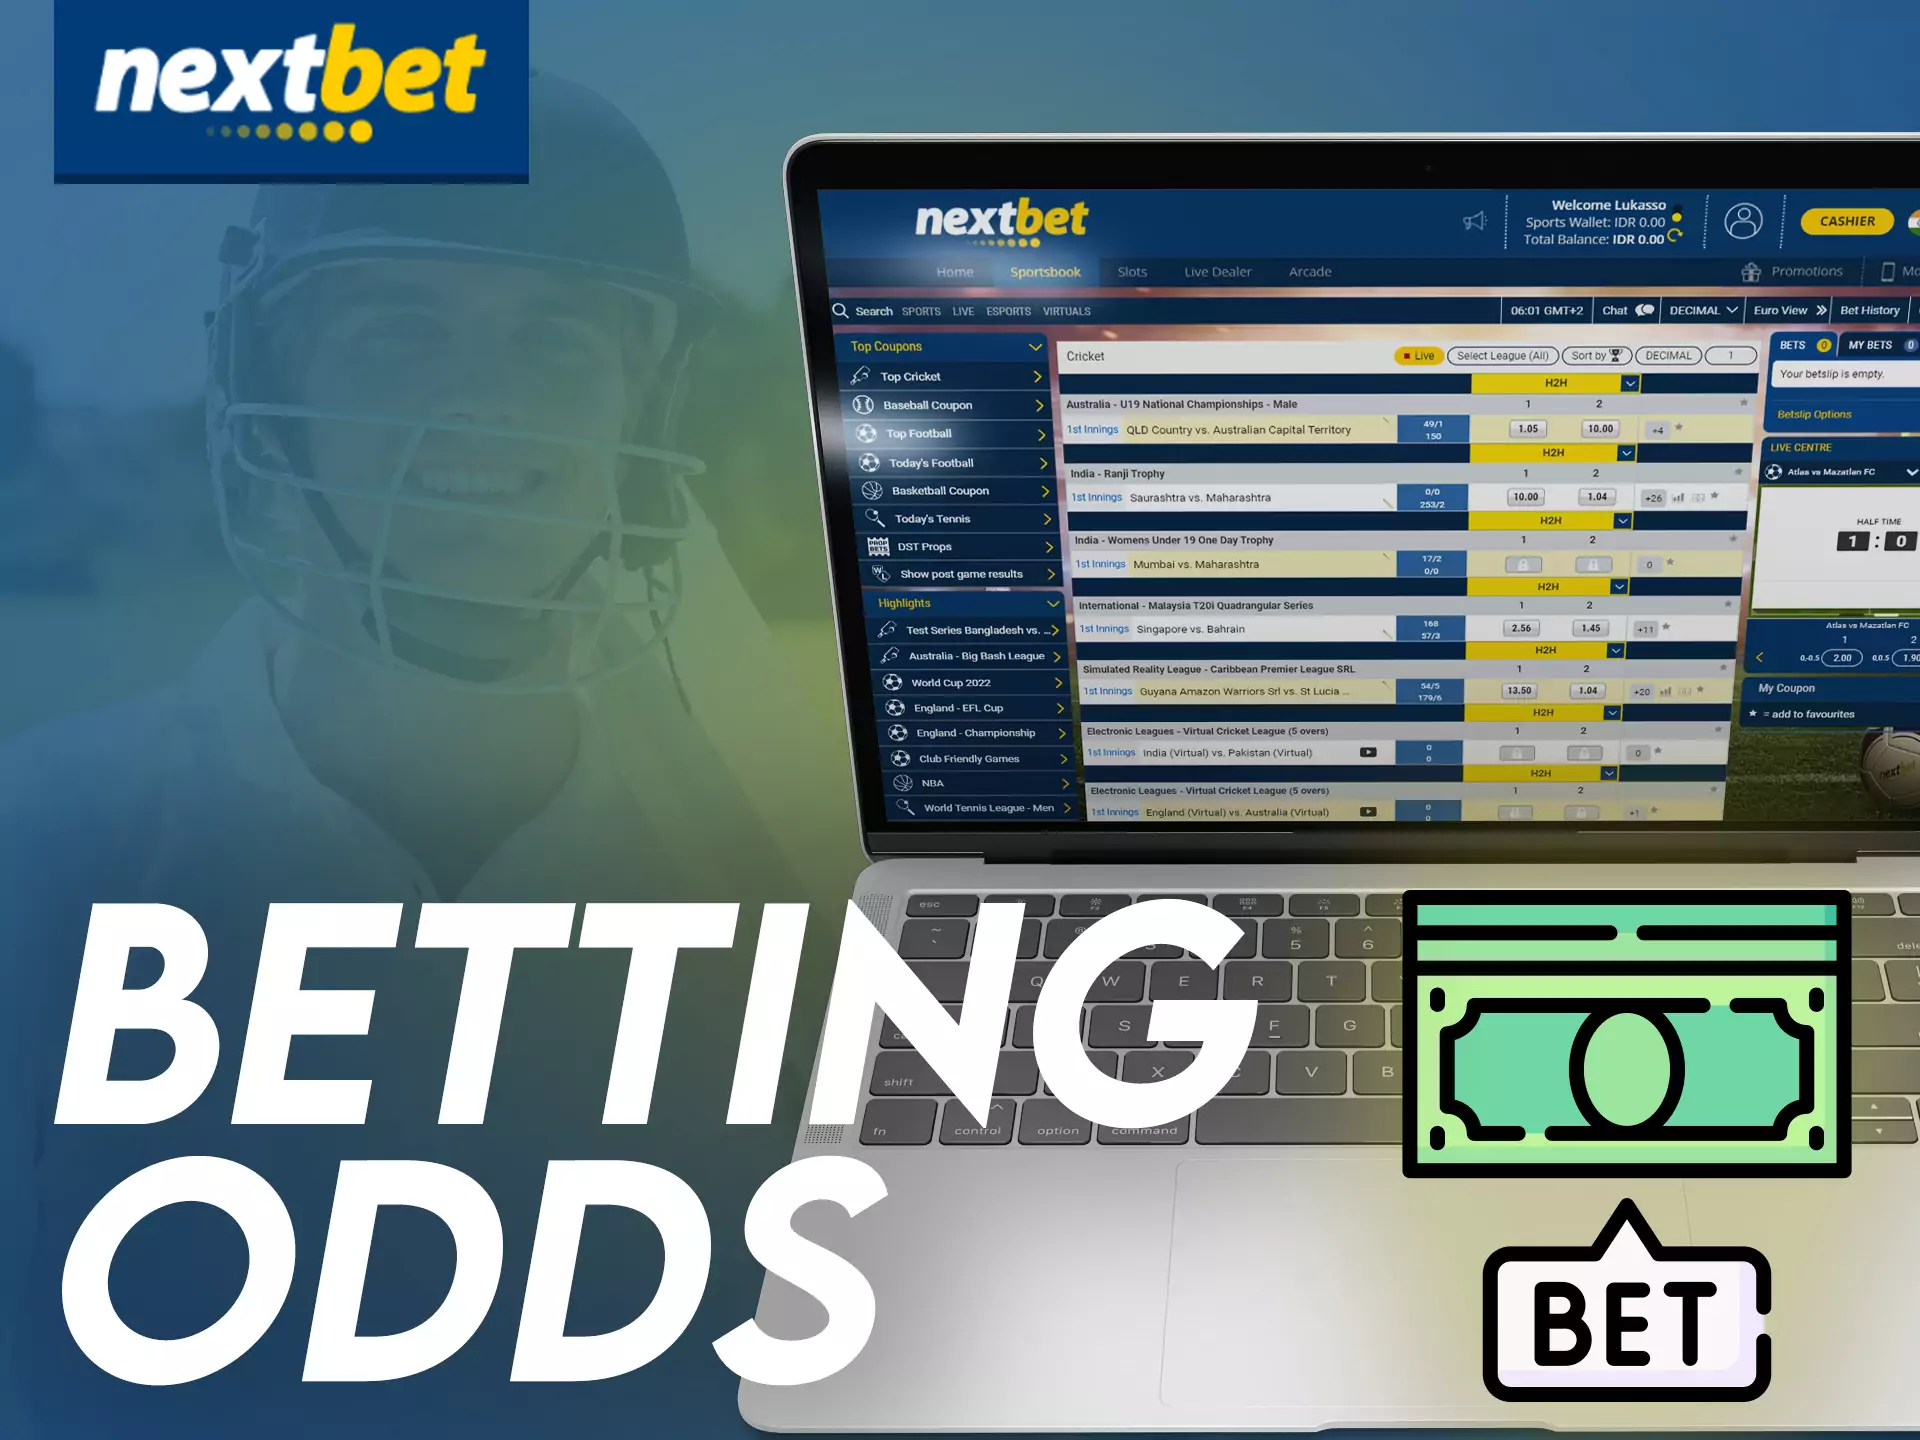 Nextbet offers special betting odds for sports events.